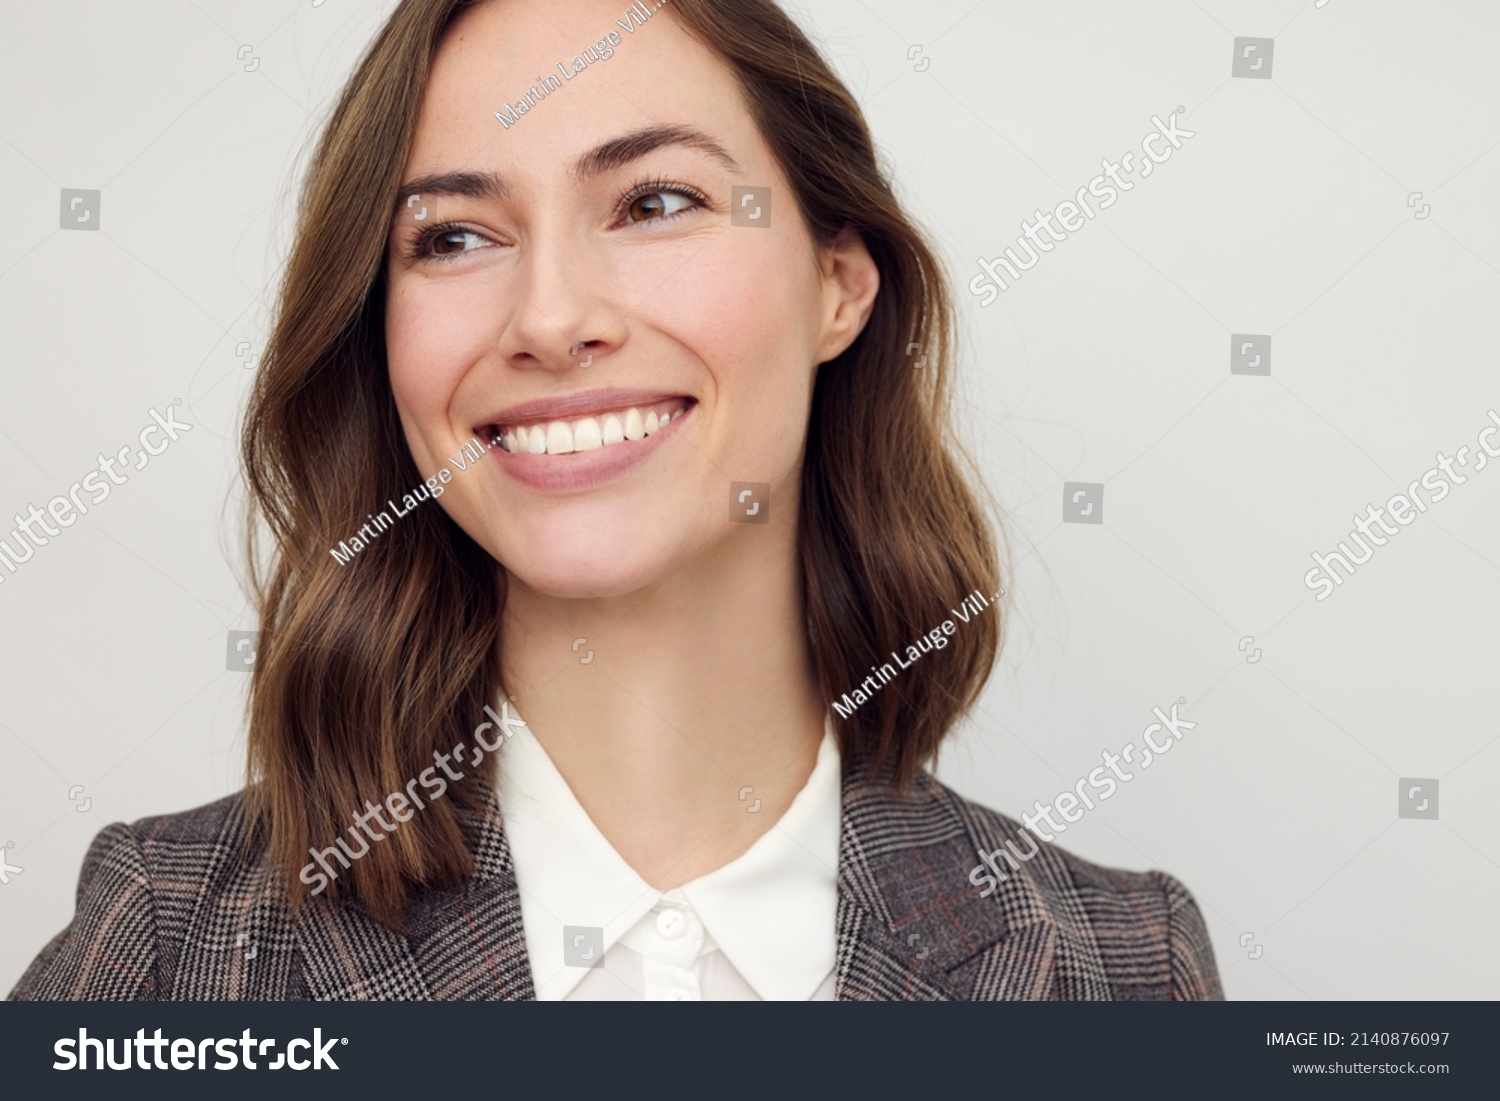 Close-up portrait of beautiful young businesswoman looking happy and confident to the left. Big smile on her face, looking beautiful and cheerful standing isolated on white background. #2140876097